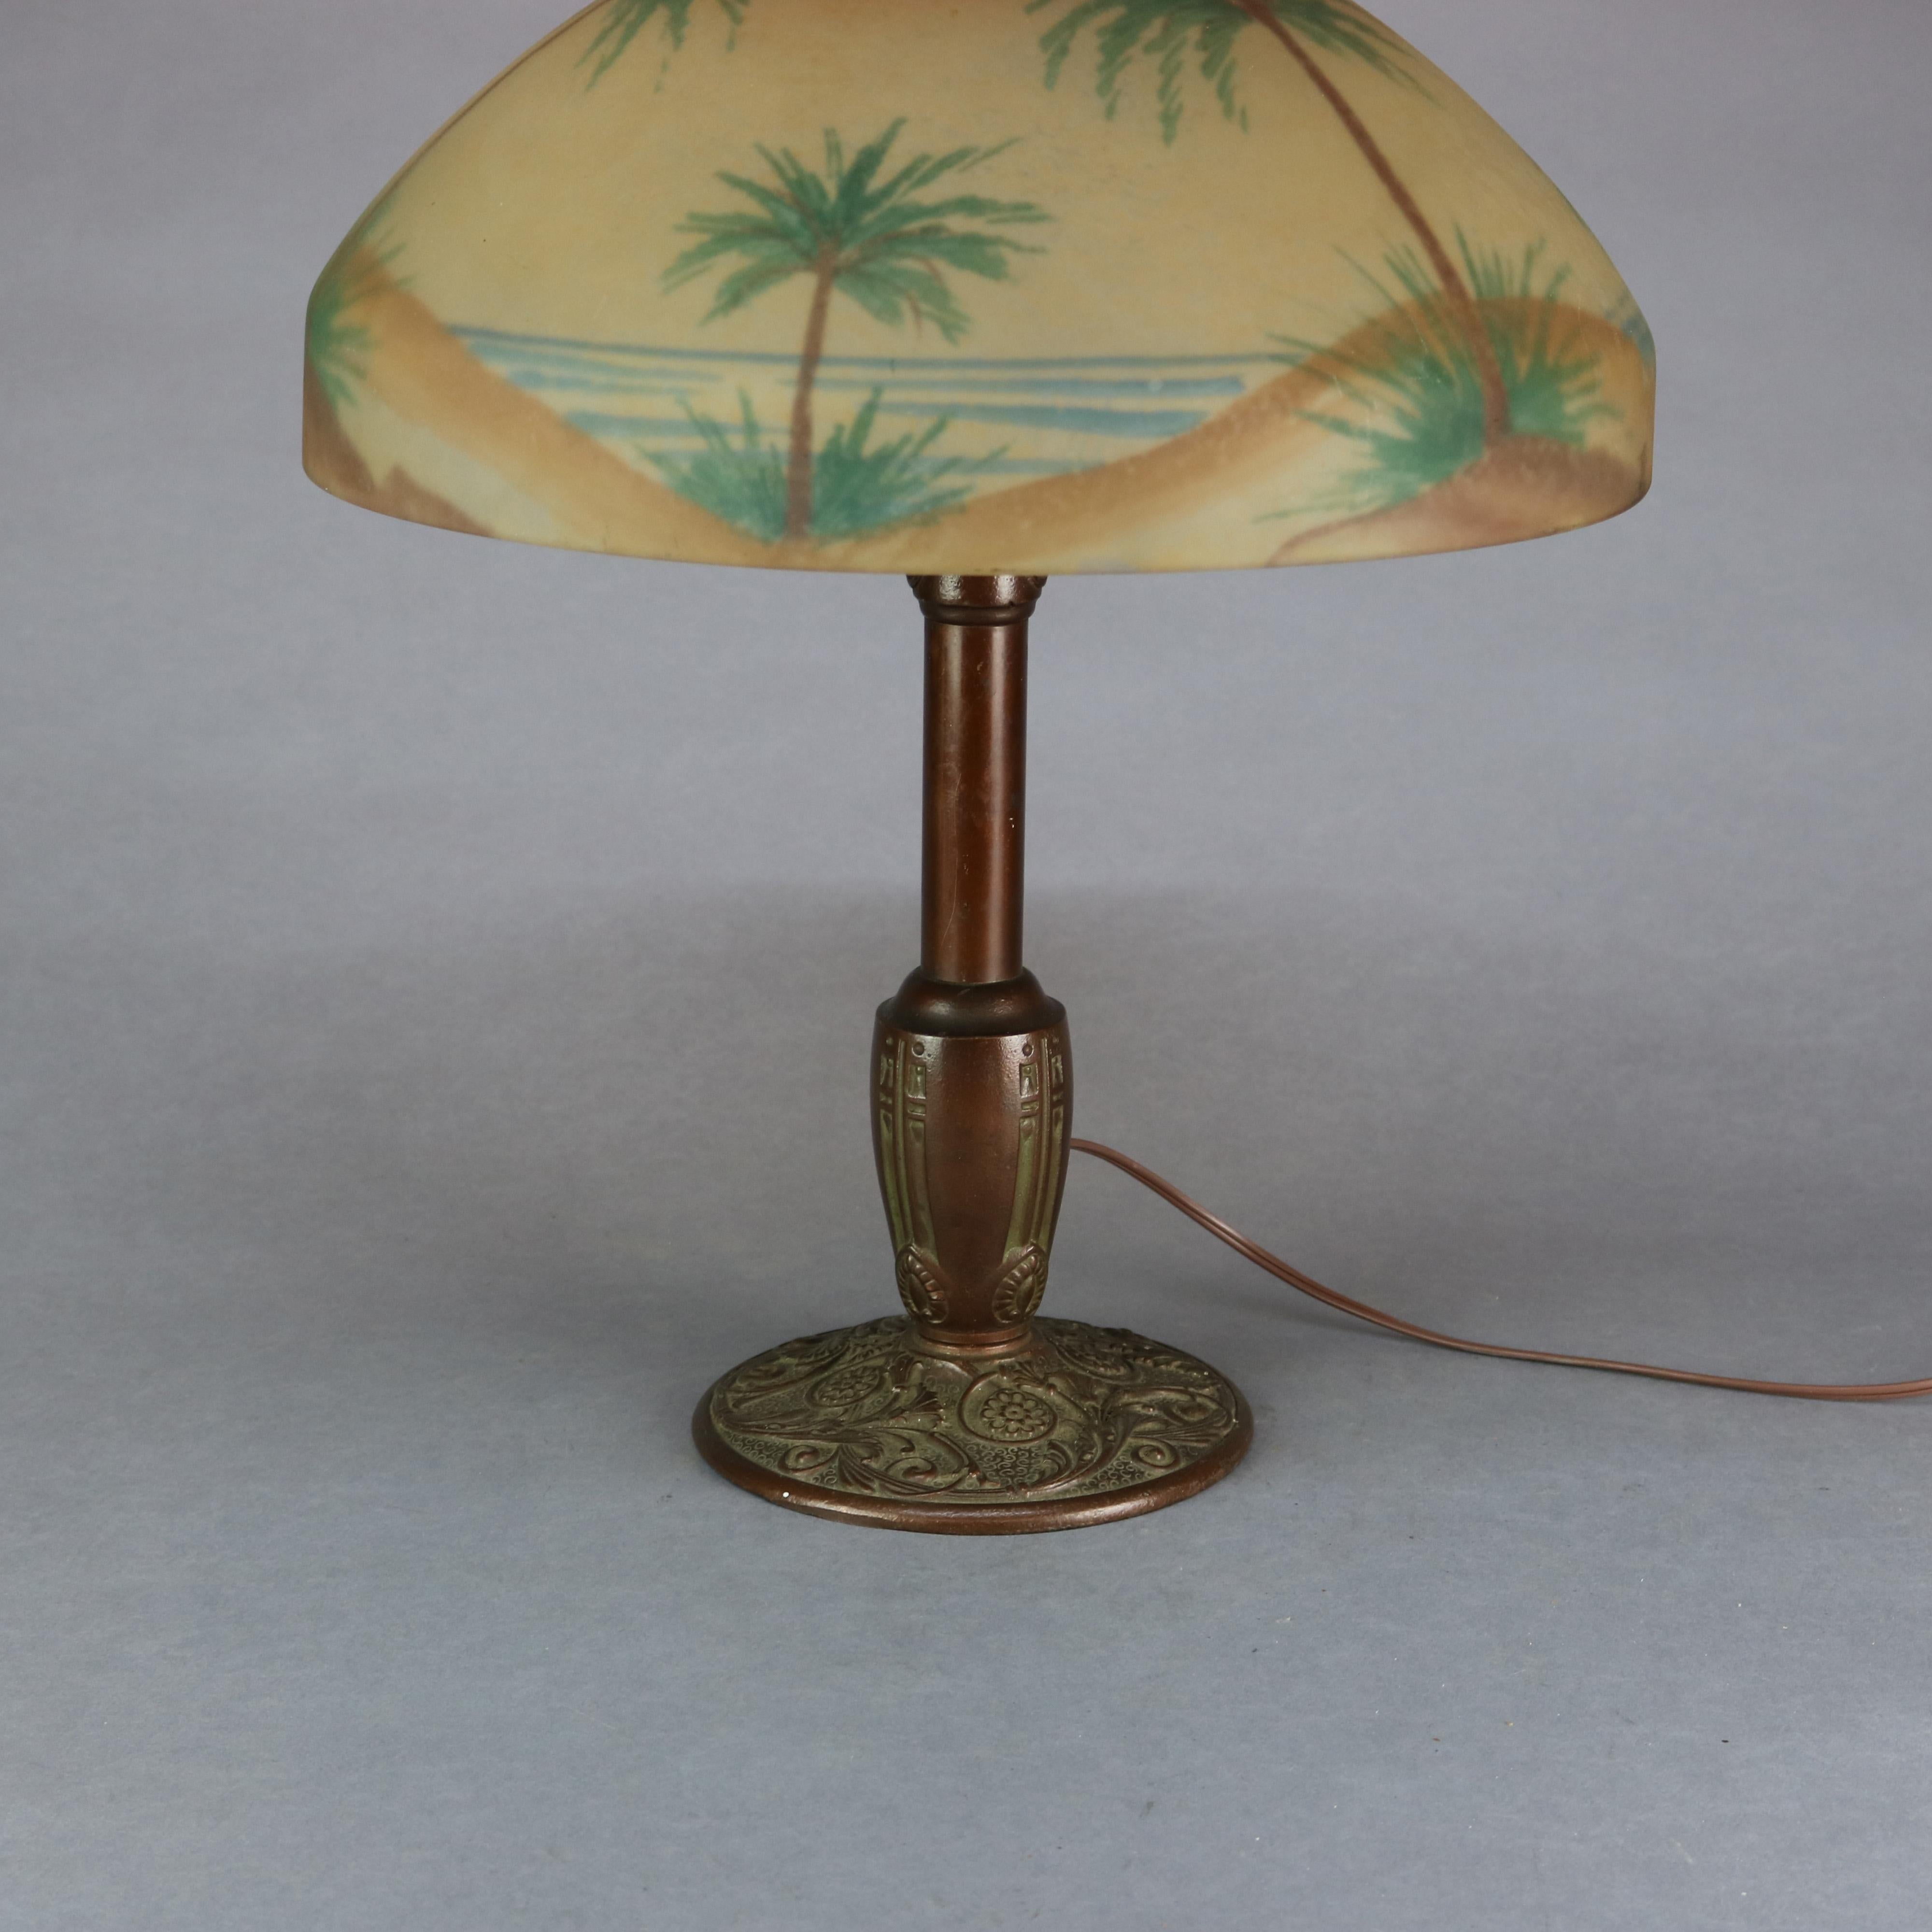 Cast Pittsburgh Reverse Painted Arts & Crafts Beach Sunset with Palms Table Lamp 1920